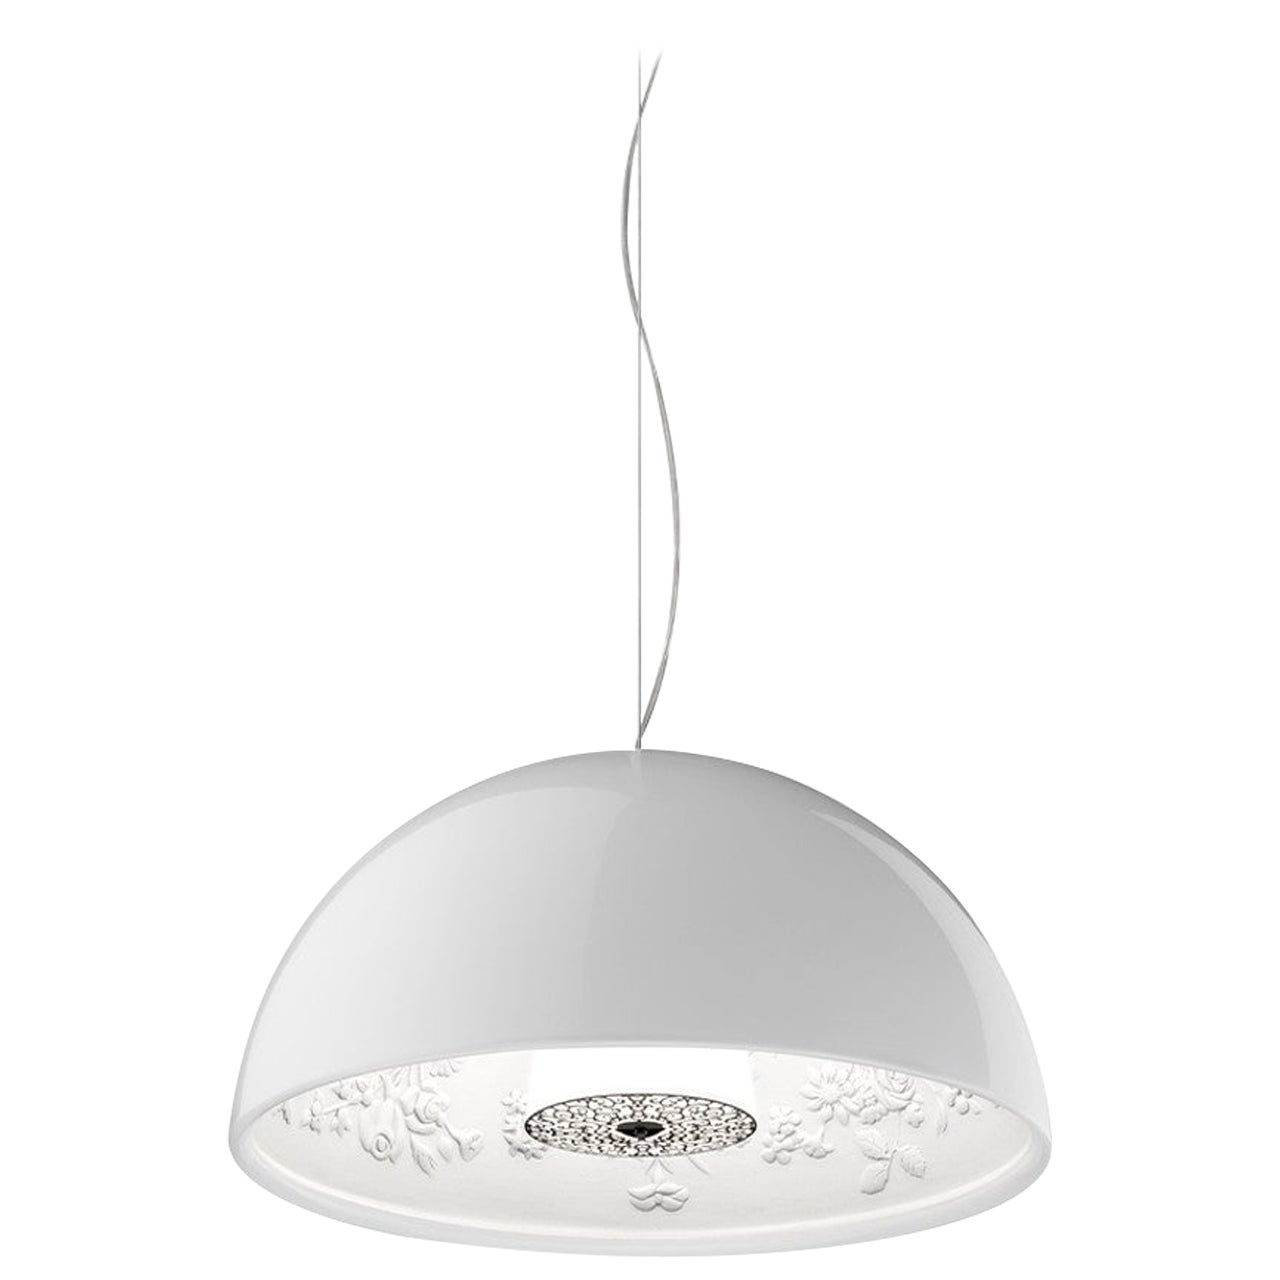 Flos Small Skygarden Pendant Dimmable Light in White by Marcel Wanders For Sale